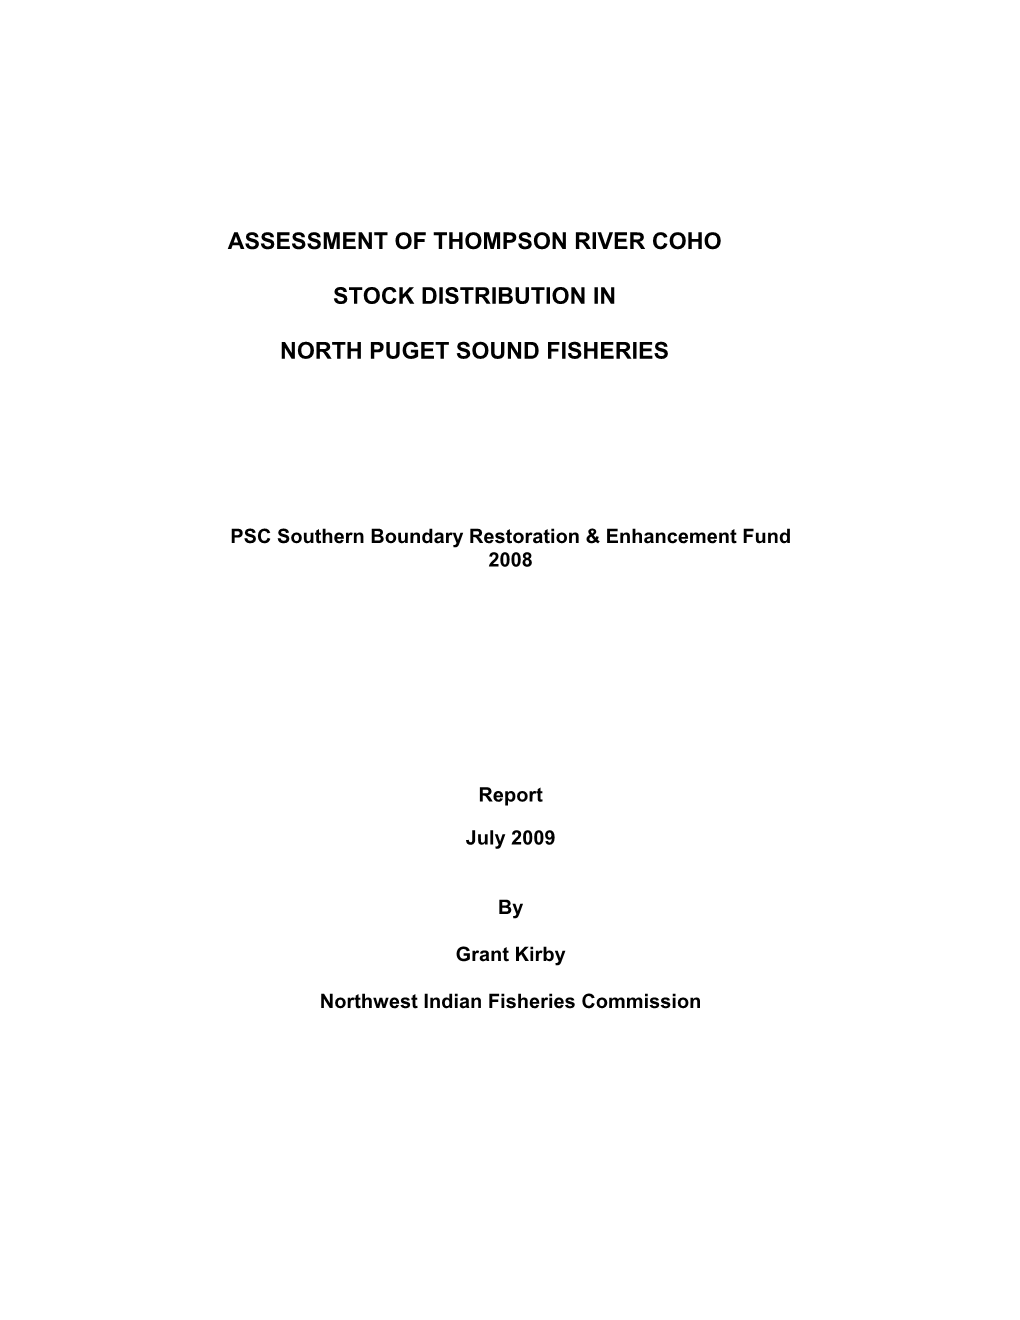 Assessment of Thompson River Coho Stock Distribution in North Puget Sound Fisheries